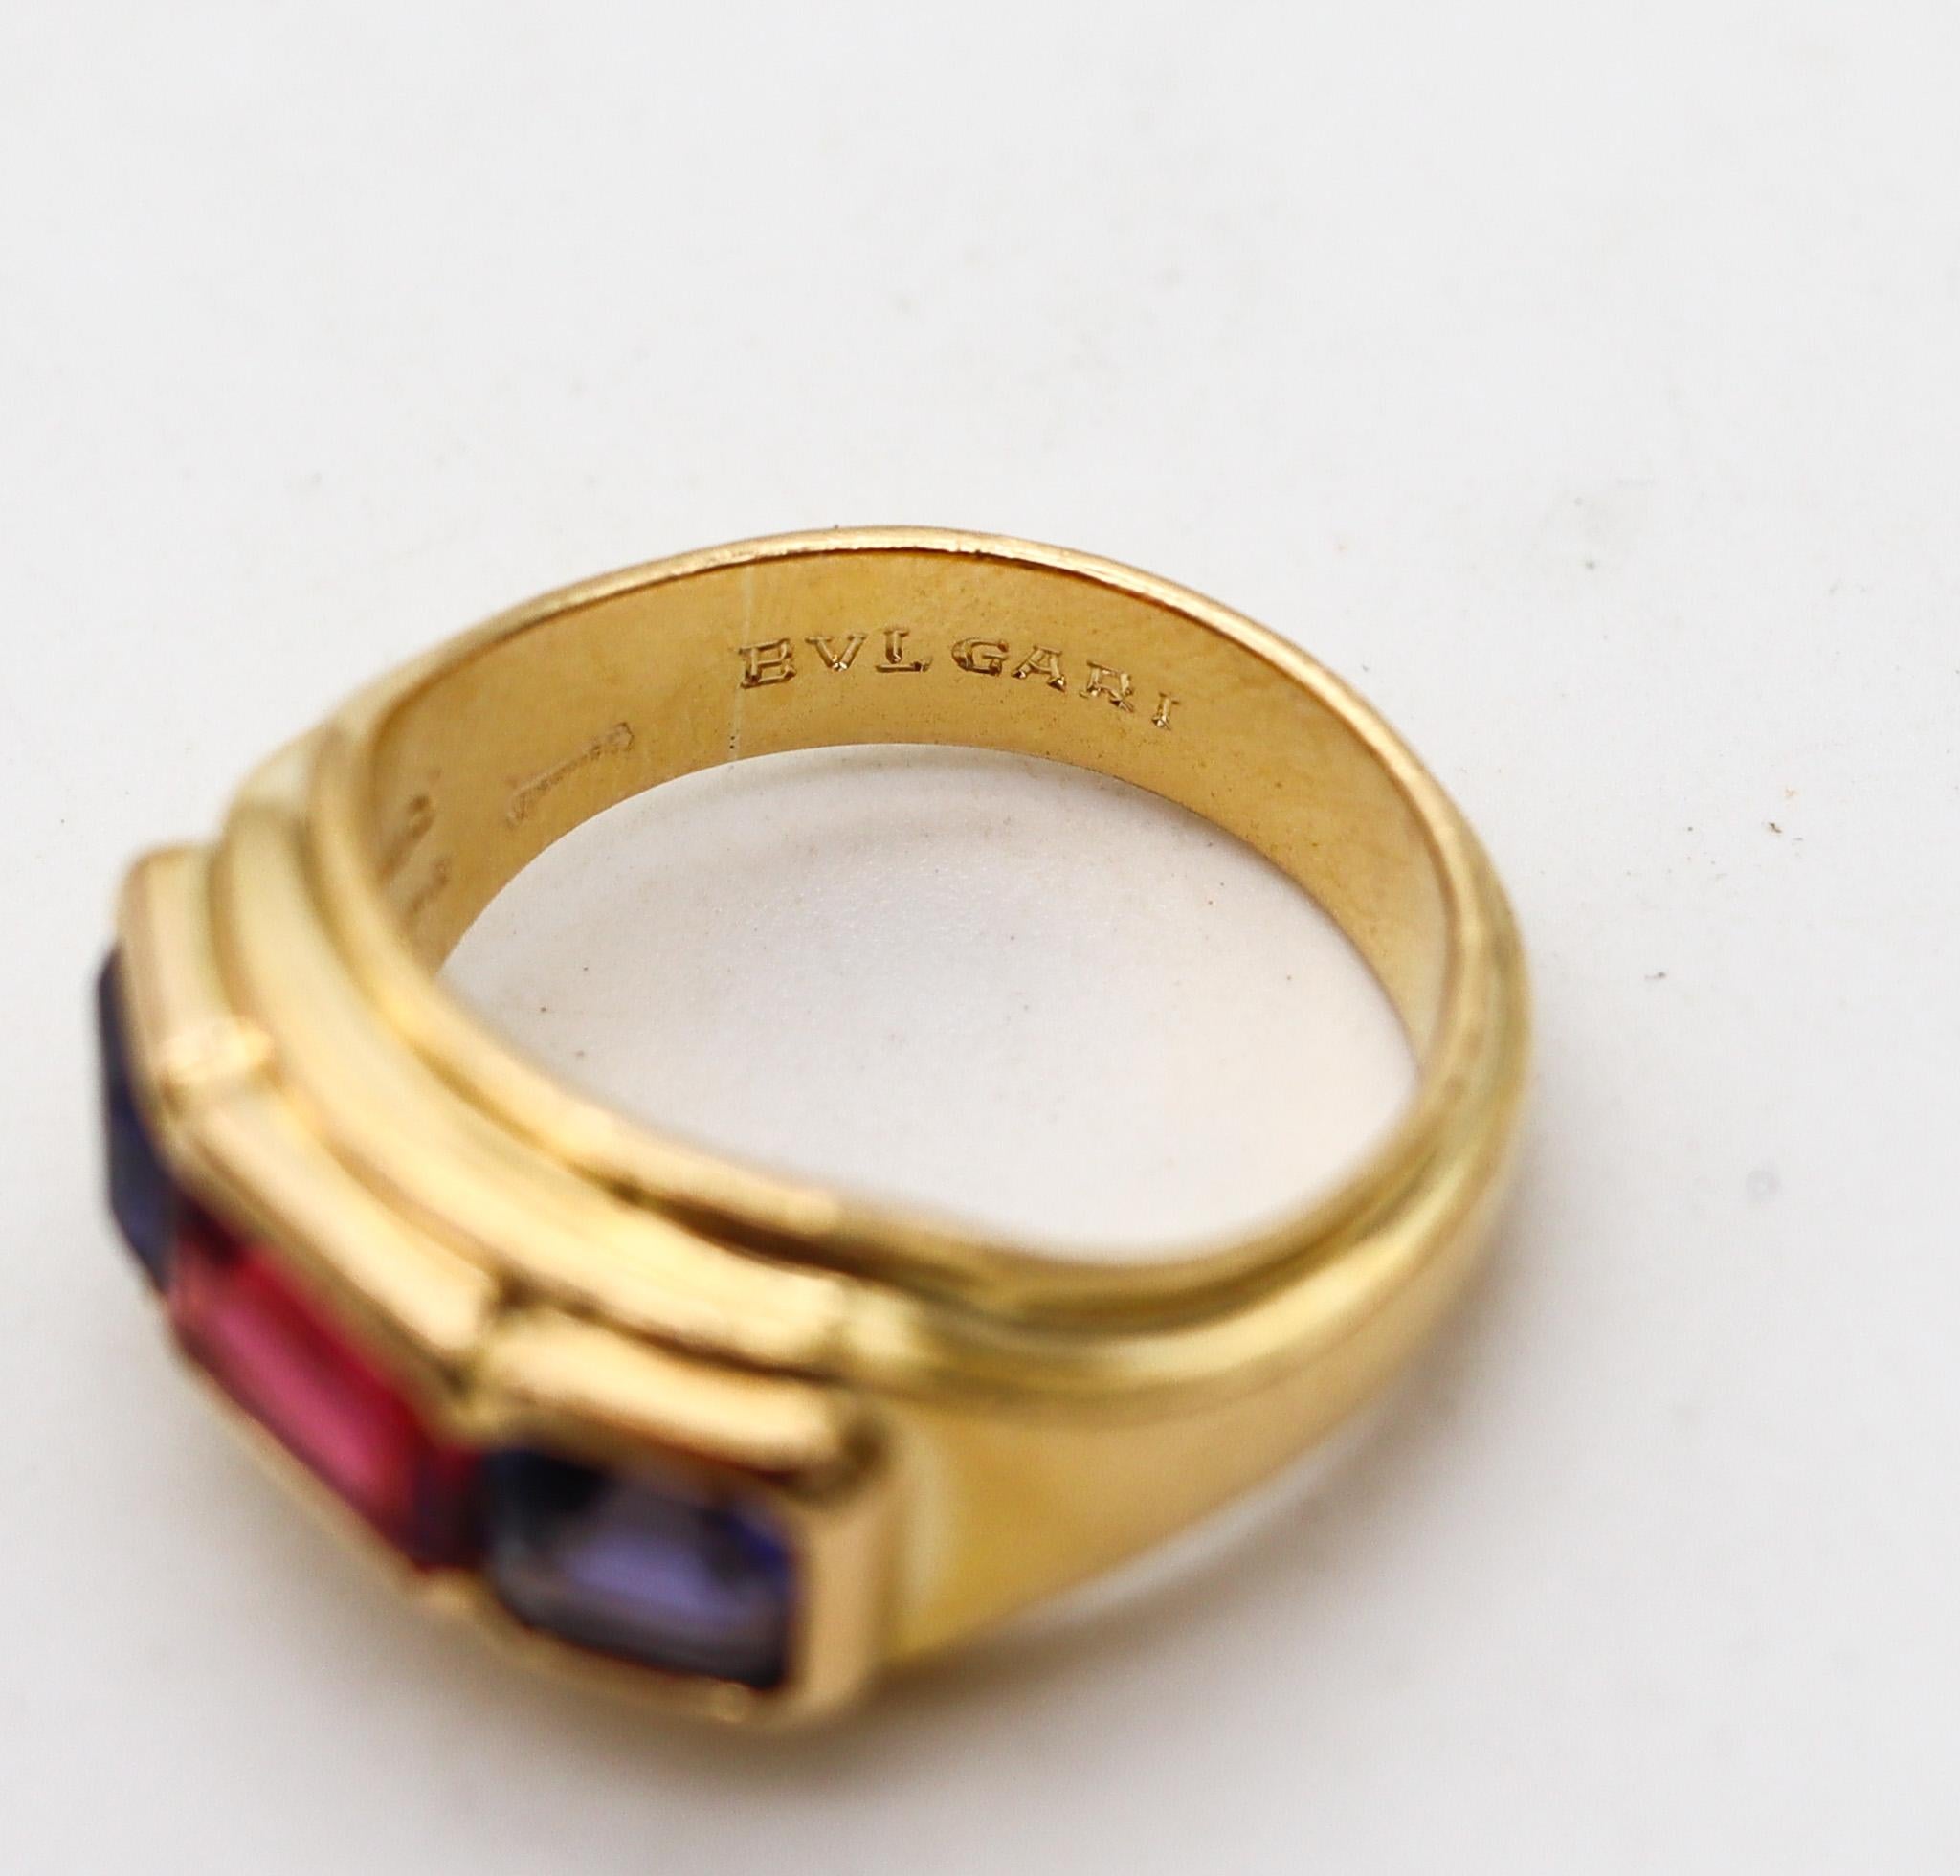 Women's or Men's Bvlgari France Three Gems Ring In 18Kt Gold With 2.18 Ctw In Tourmaline & Iolite For Sale